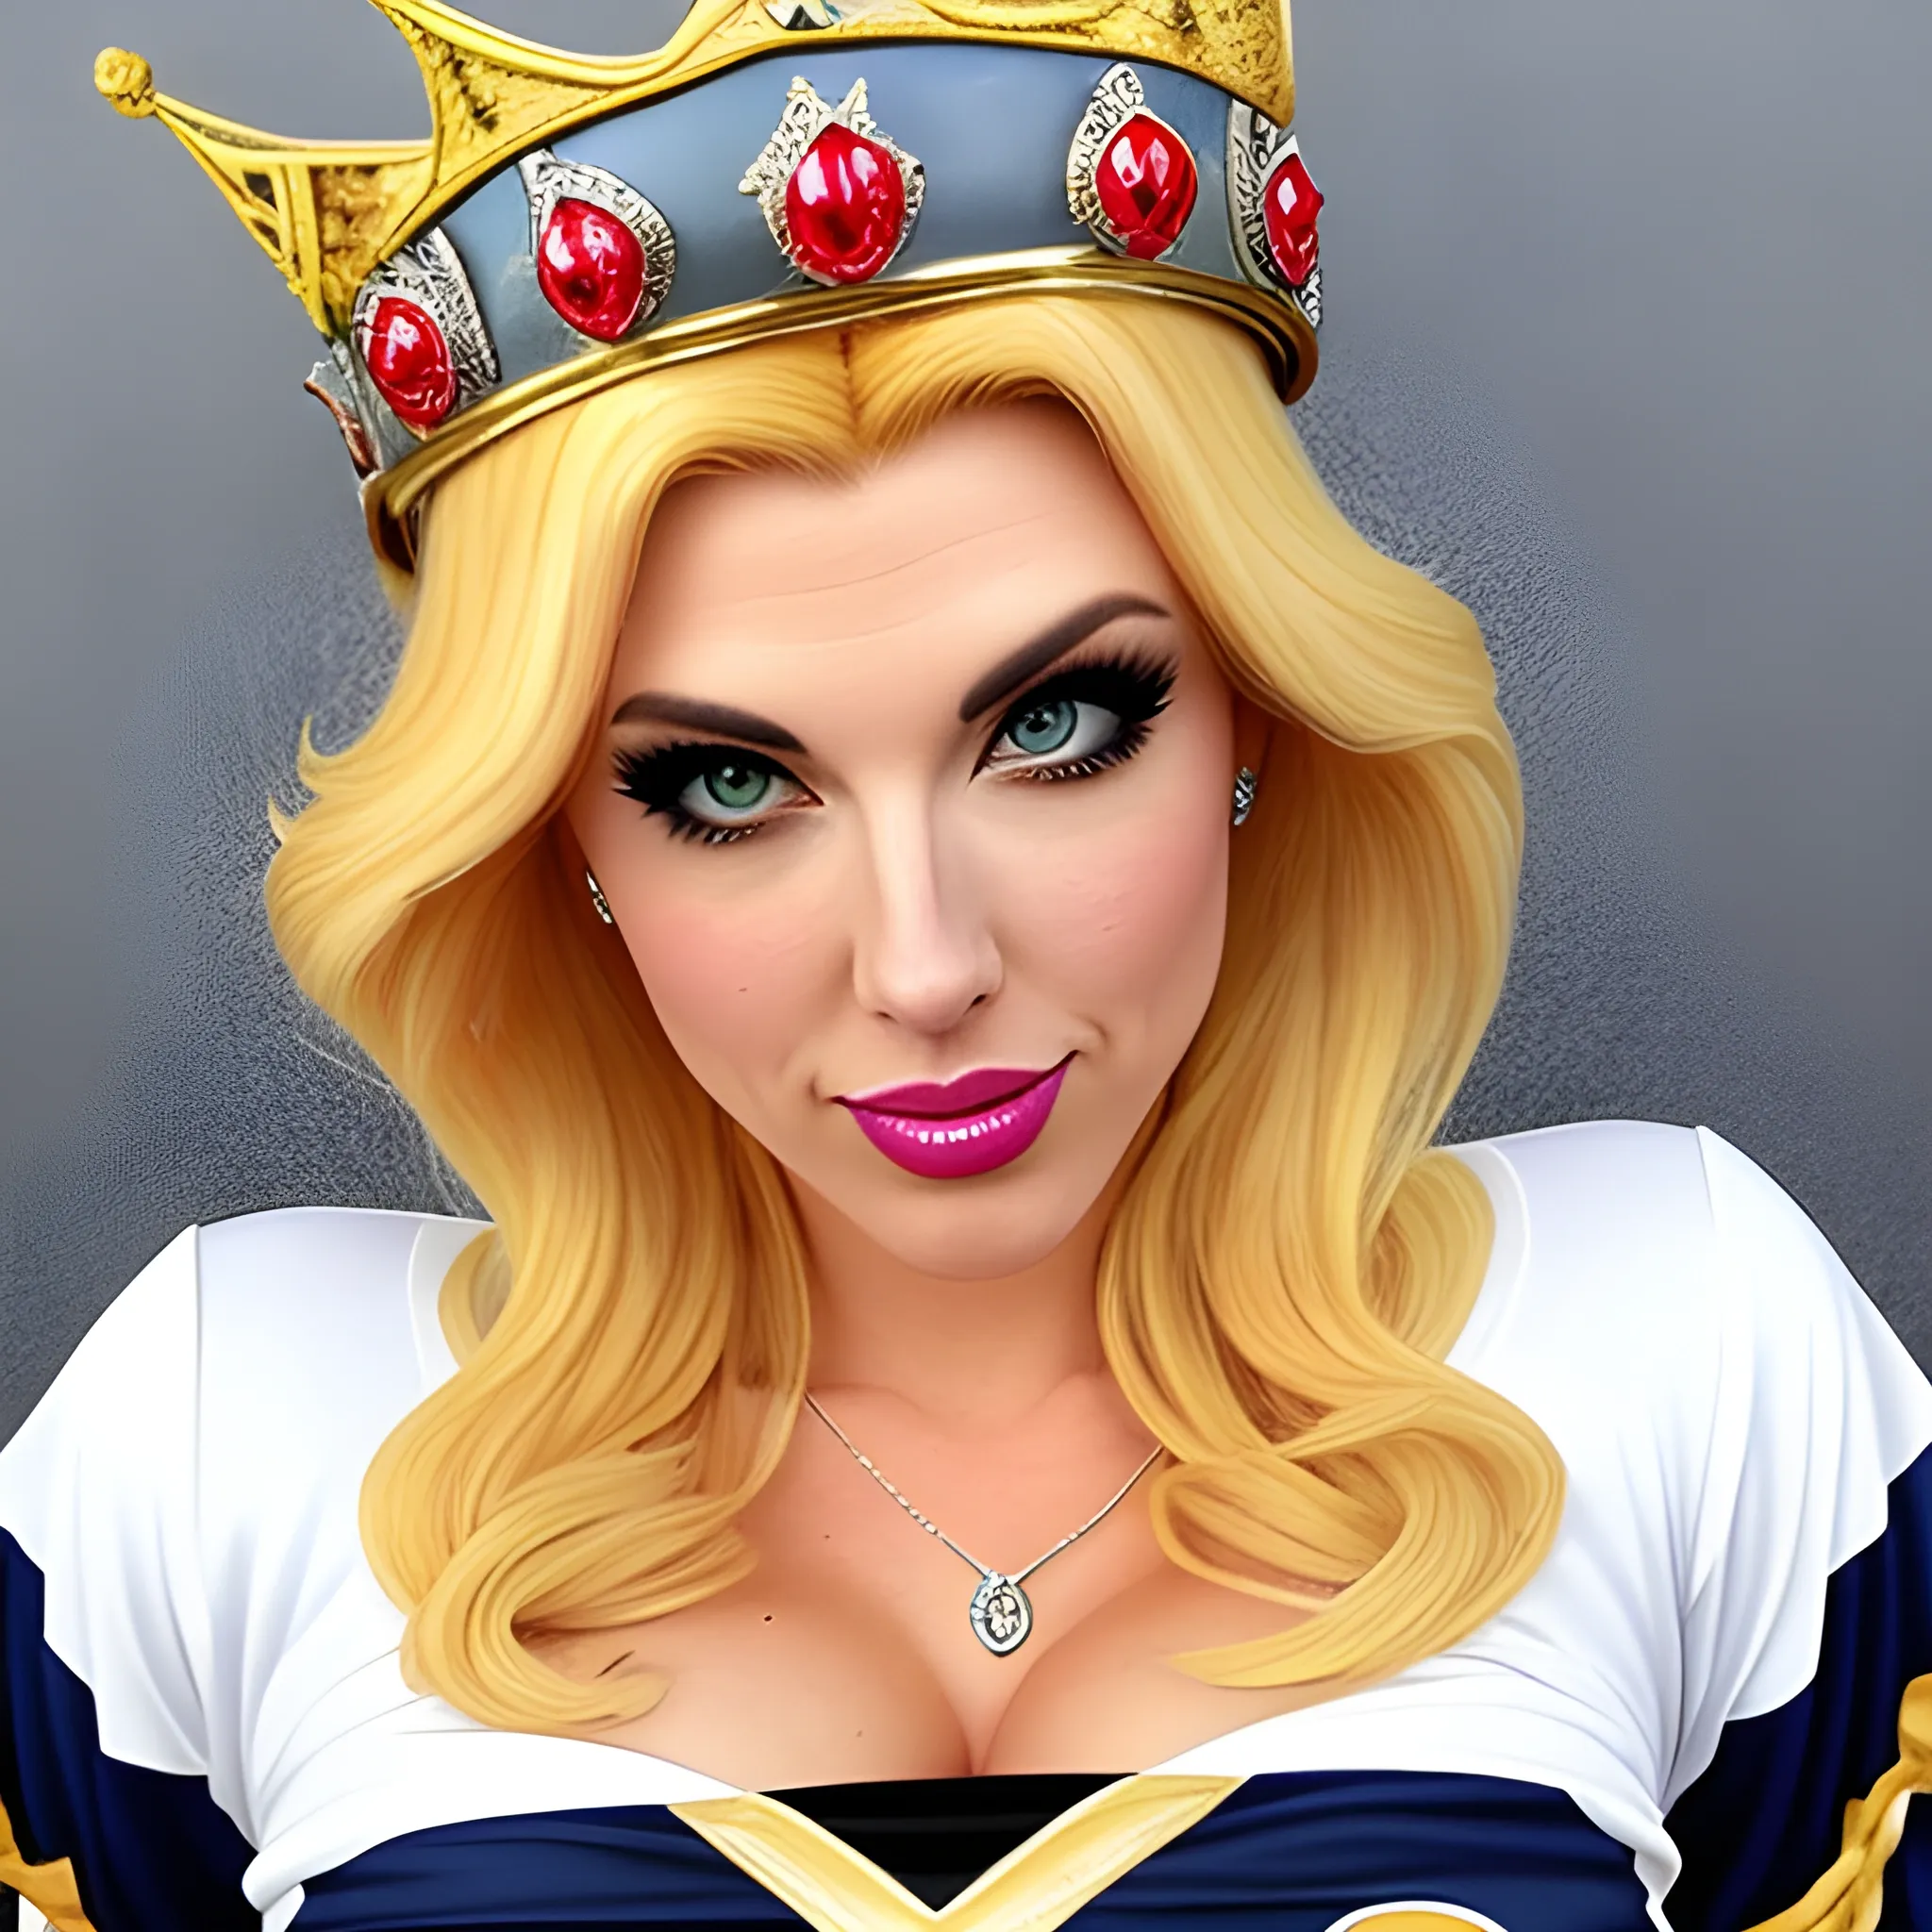 Attractive, cute, sexy Princess peach blonde girl with a crown and an american football in a navy blue busch light beer jersey. The image should be sexy and have a Playboy feel to it with the girl leaning in towards the camera